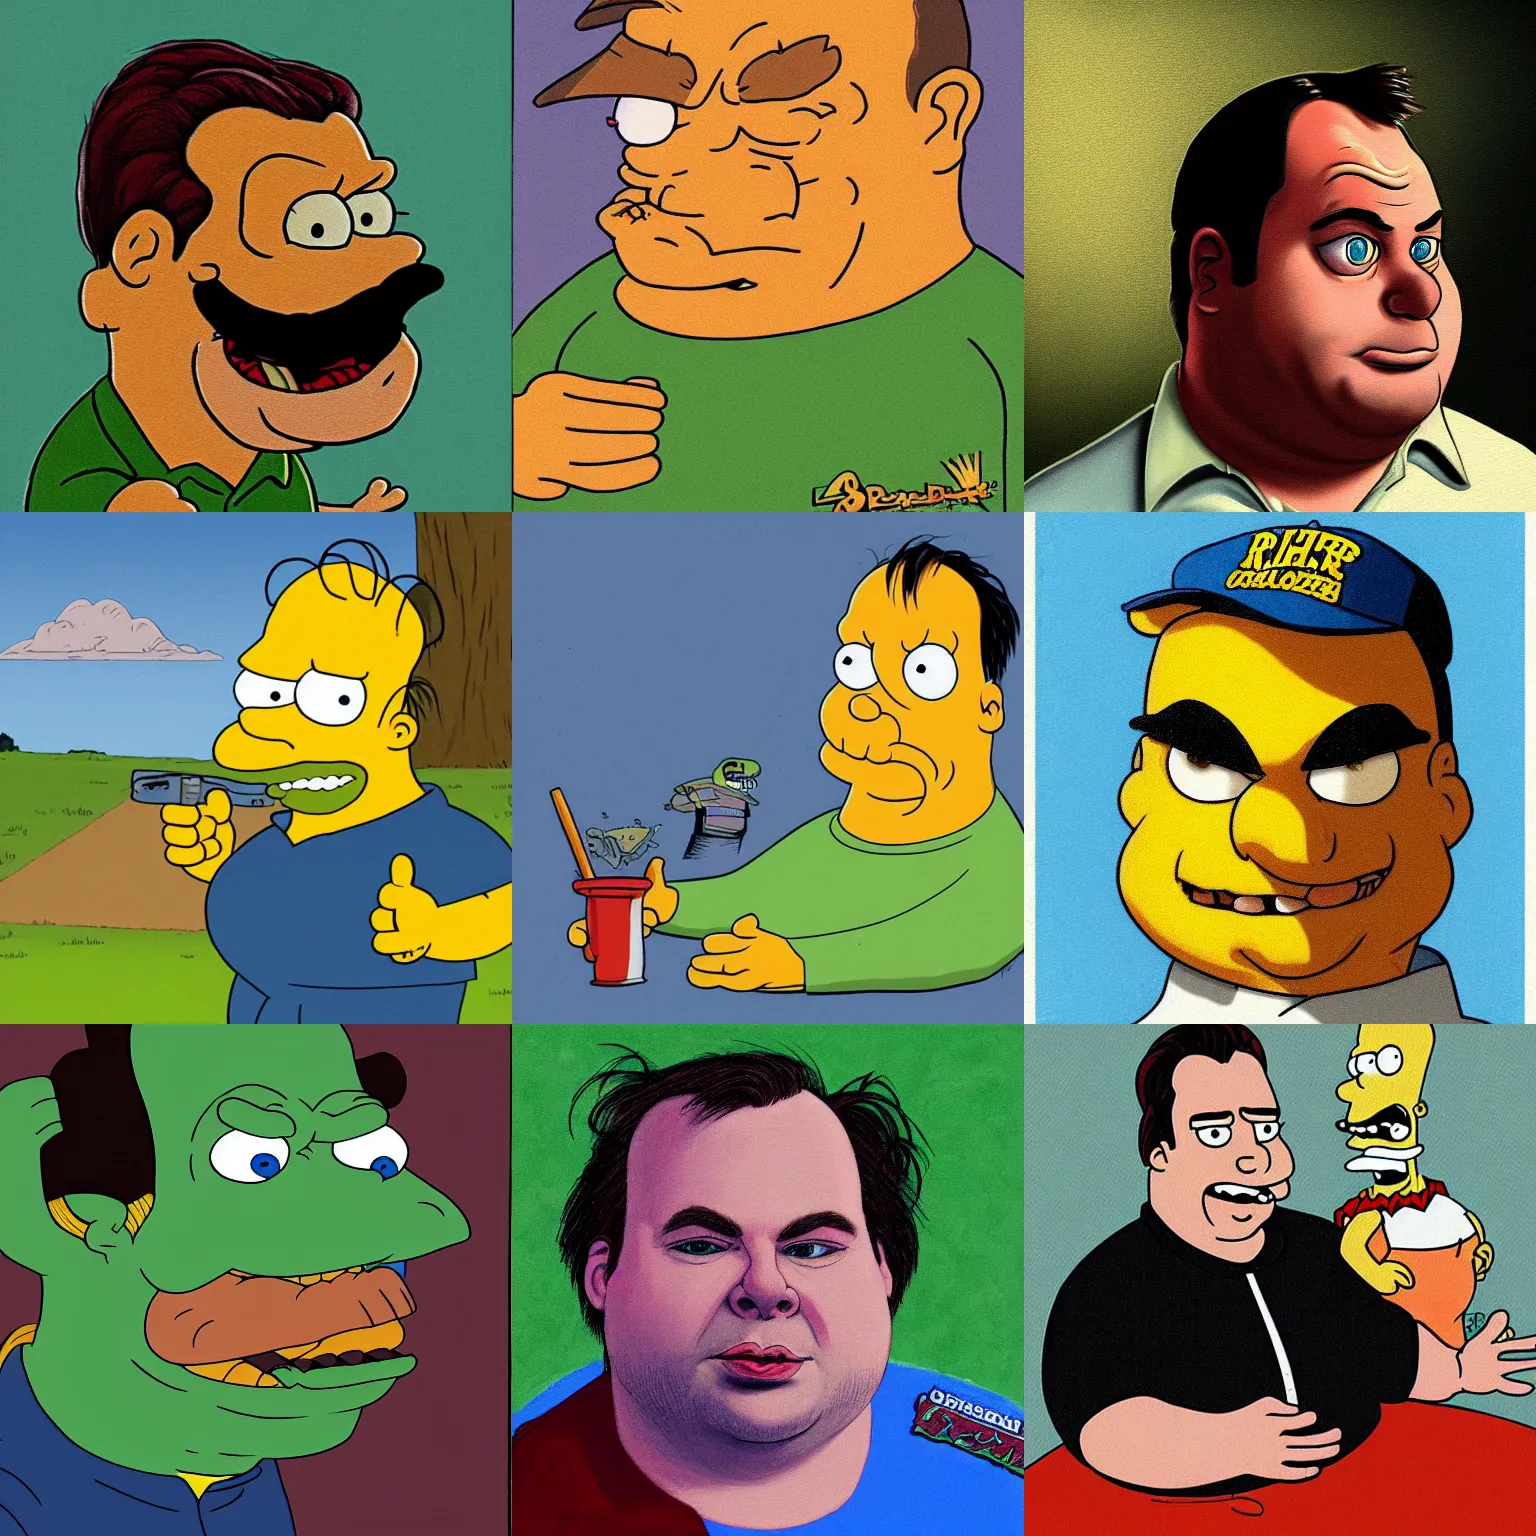 Prompt: portrait of rich evans from redlettermedia as a carachter from the simpsons